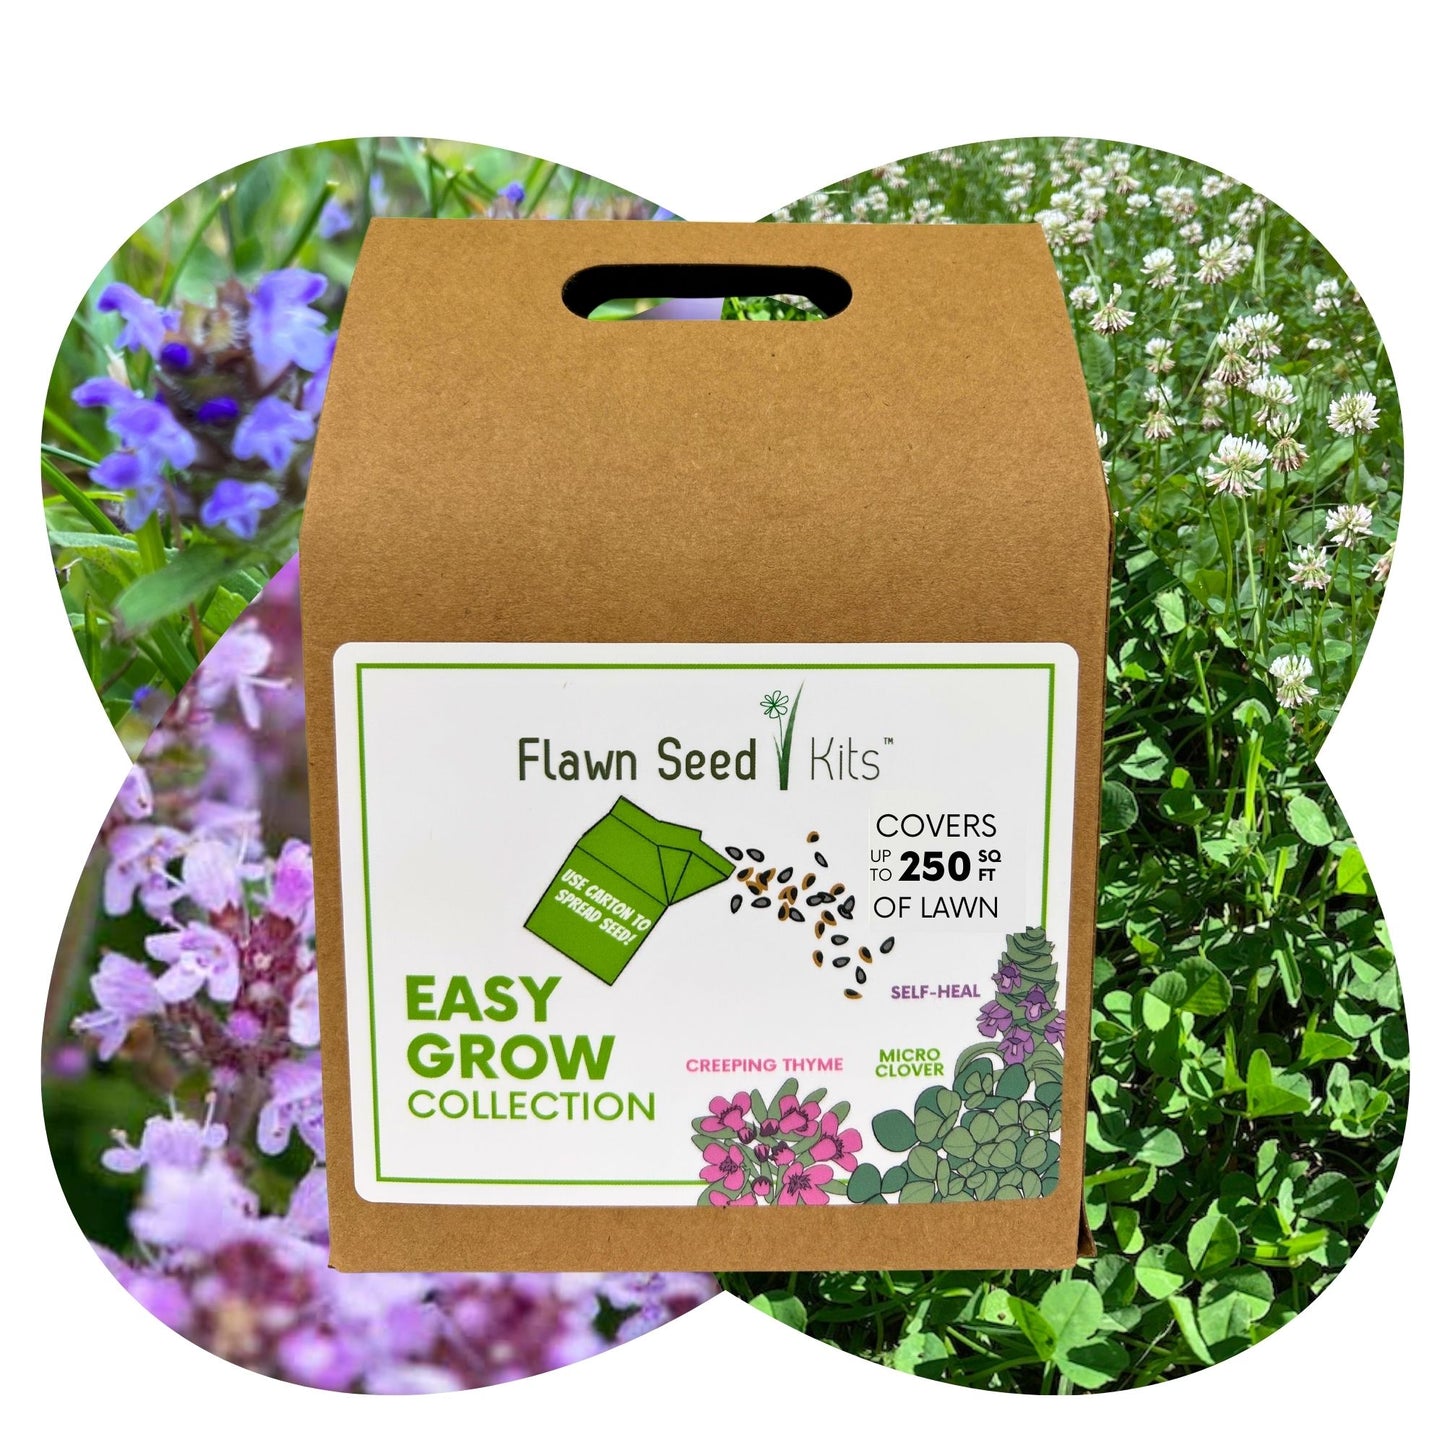 Micro Bee Lawn Flowering Pollinator Seed Kit, Micro Clover Blooms, Self-Heal Blooms, Creeping Thyme Blooms, Easy Spread Eco-Friendly Container